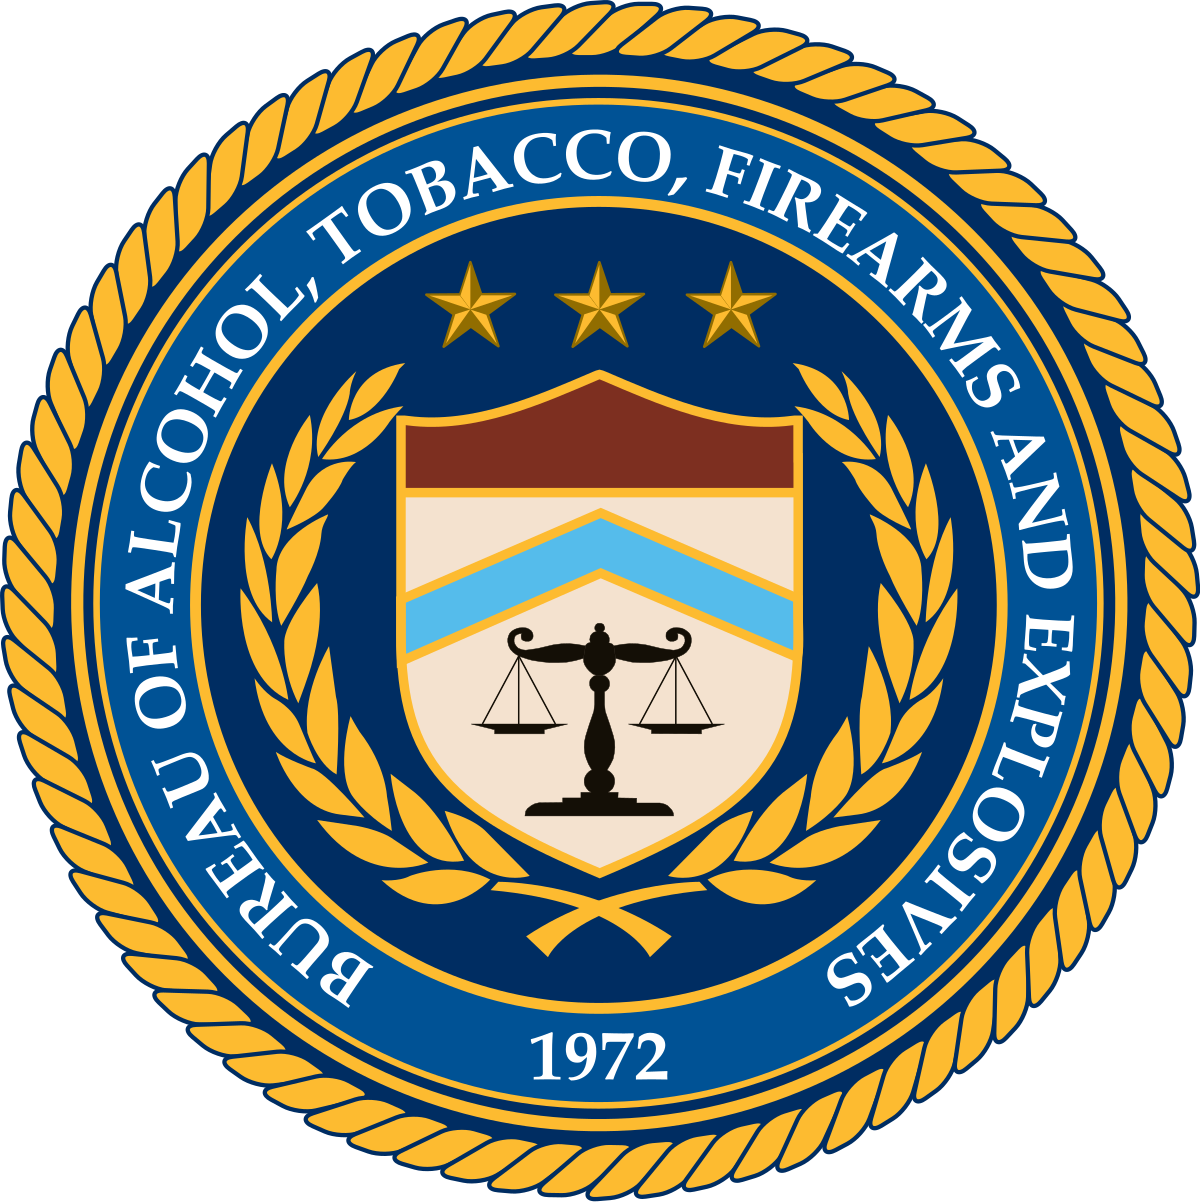 Bureau of Alcohol, Tobacco, Firearms and Explosives - Wikipedia